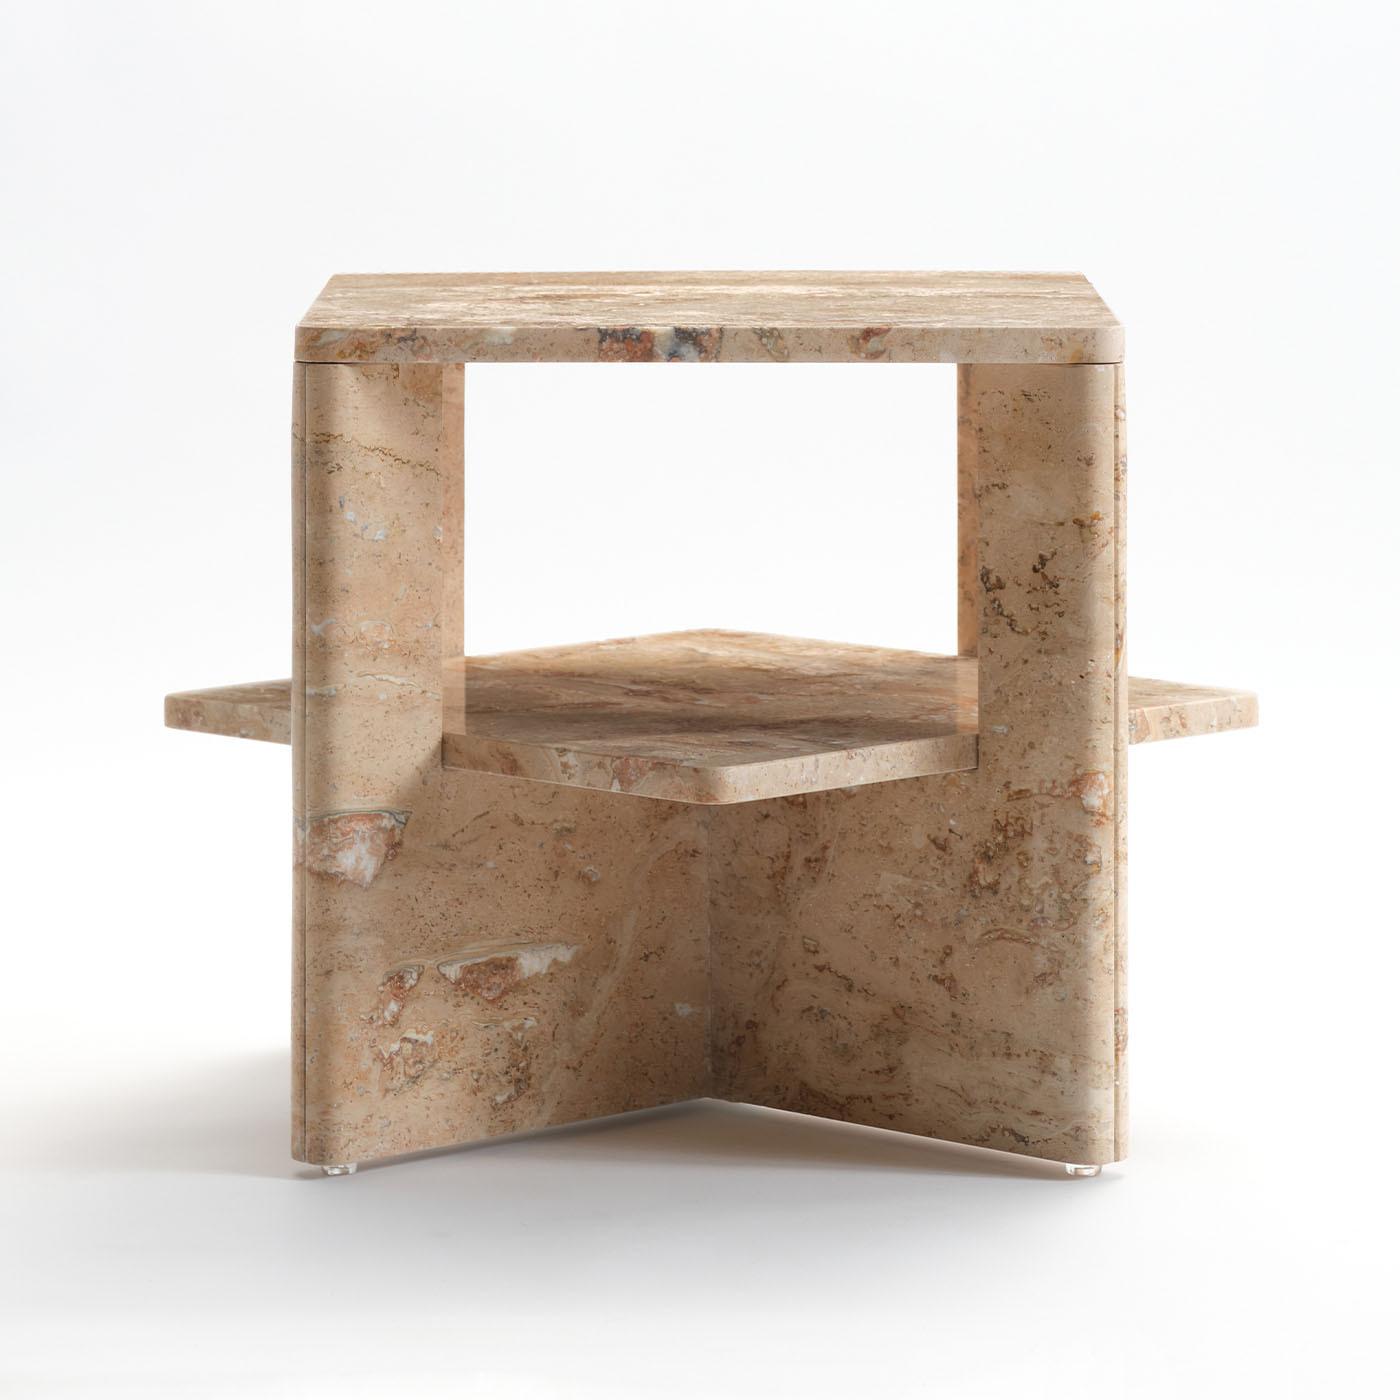 Minutely sculpted from a single Travertine block quarried from an ancient - today closed - quarry, this coffee table makes for a plush addition to contemporary-style decors. Two U-shaped slabs intersect for sustaining both the upper top and the